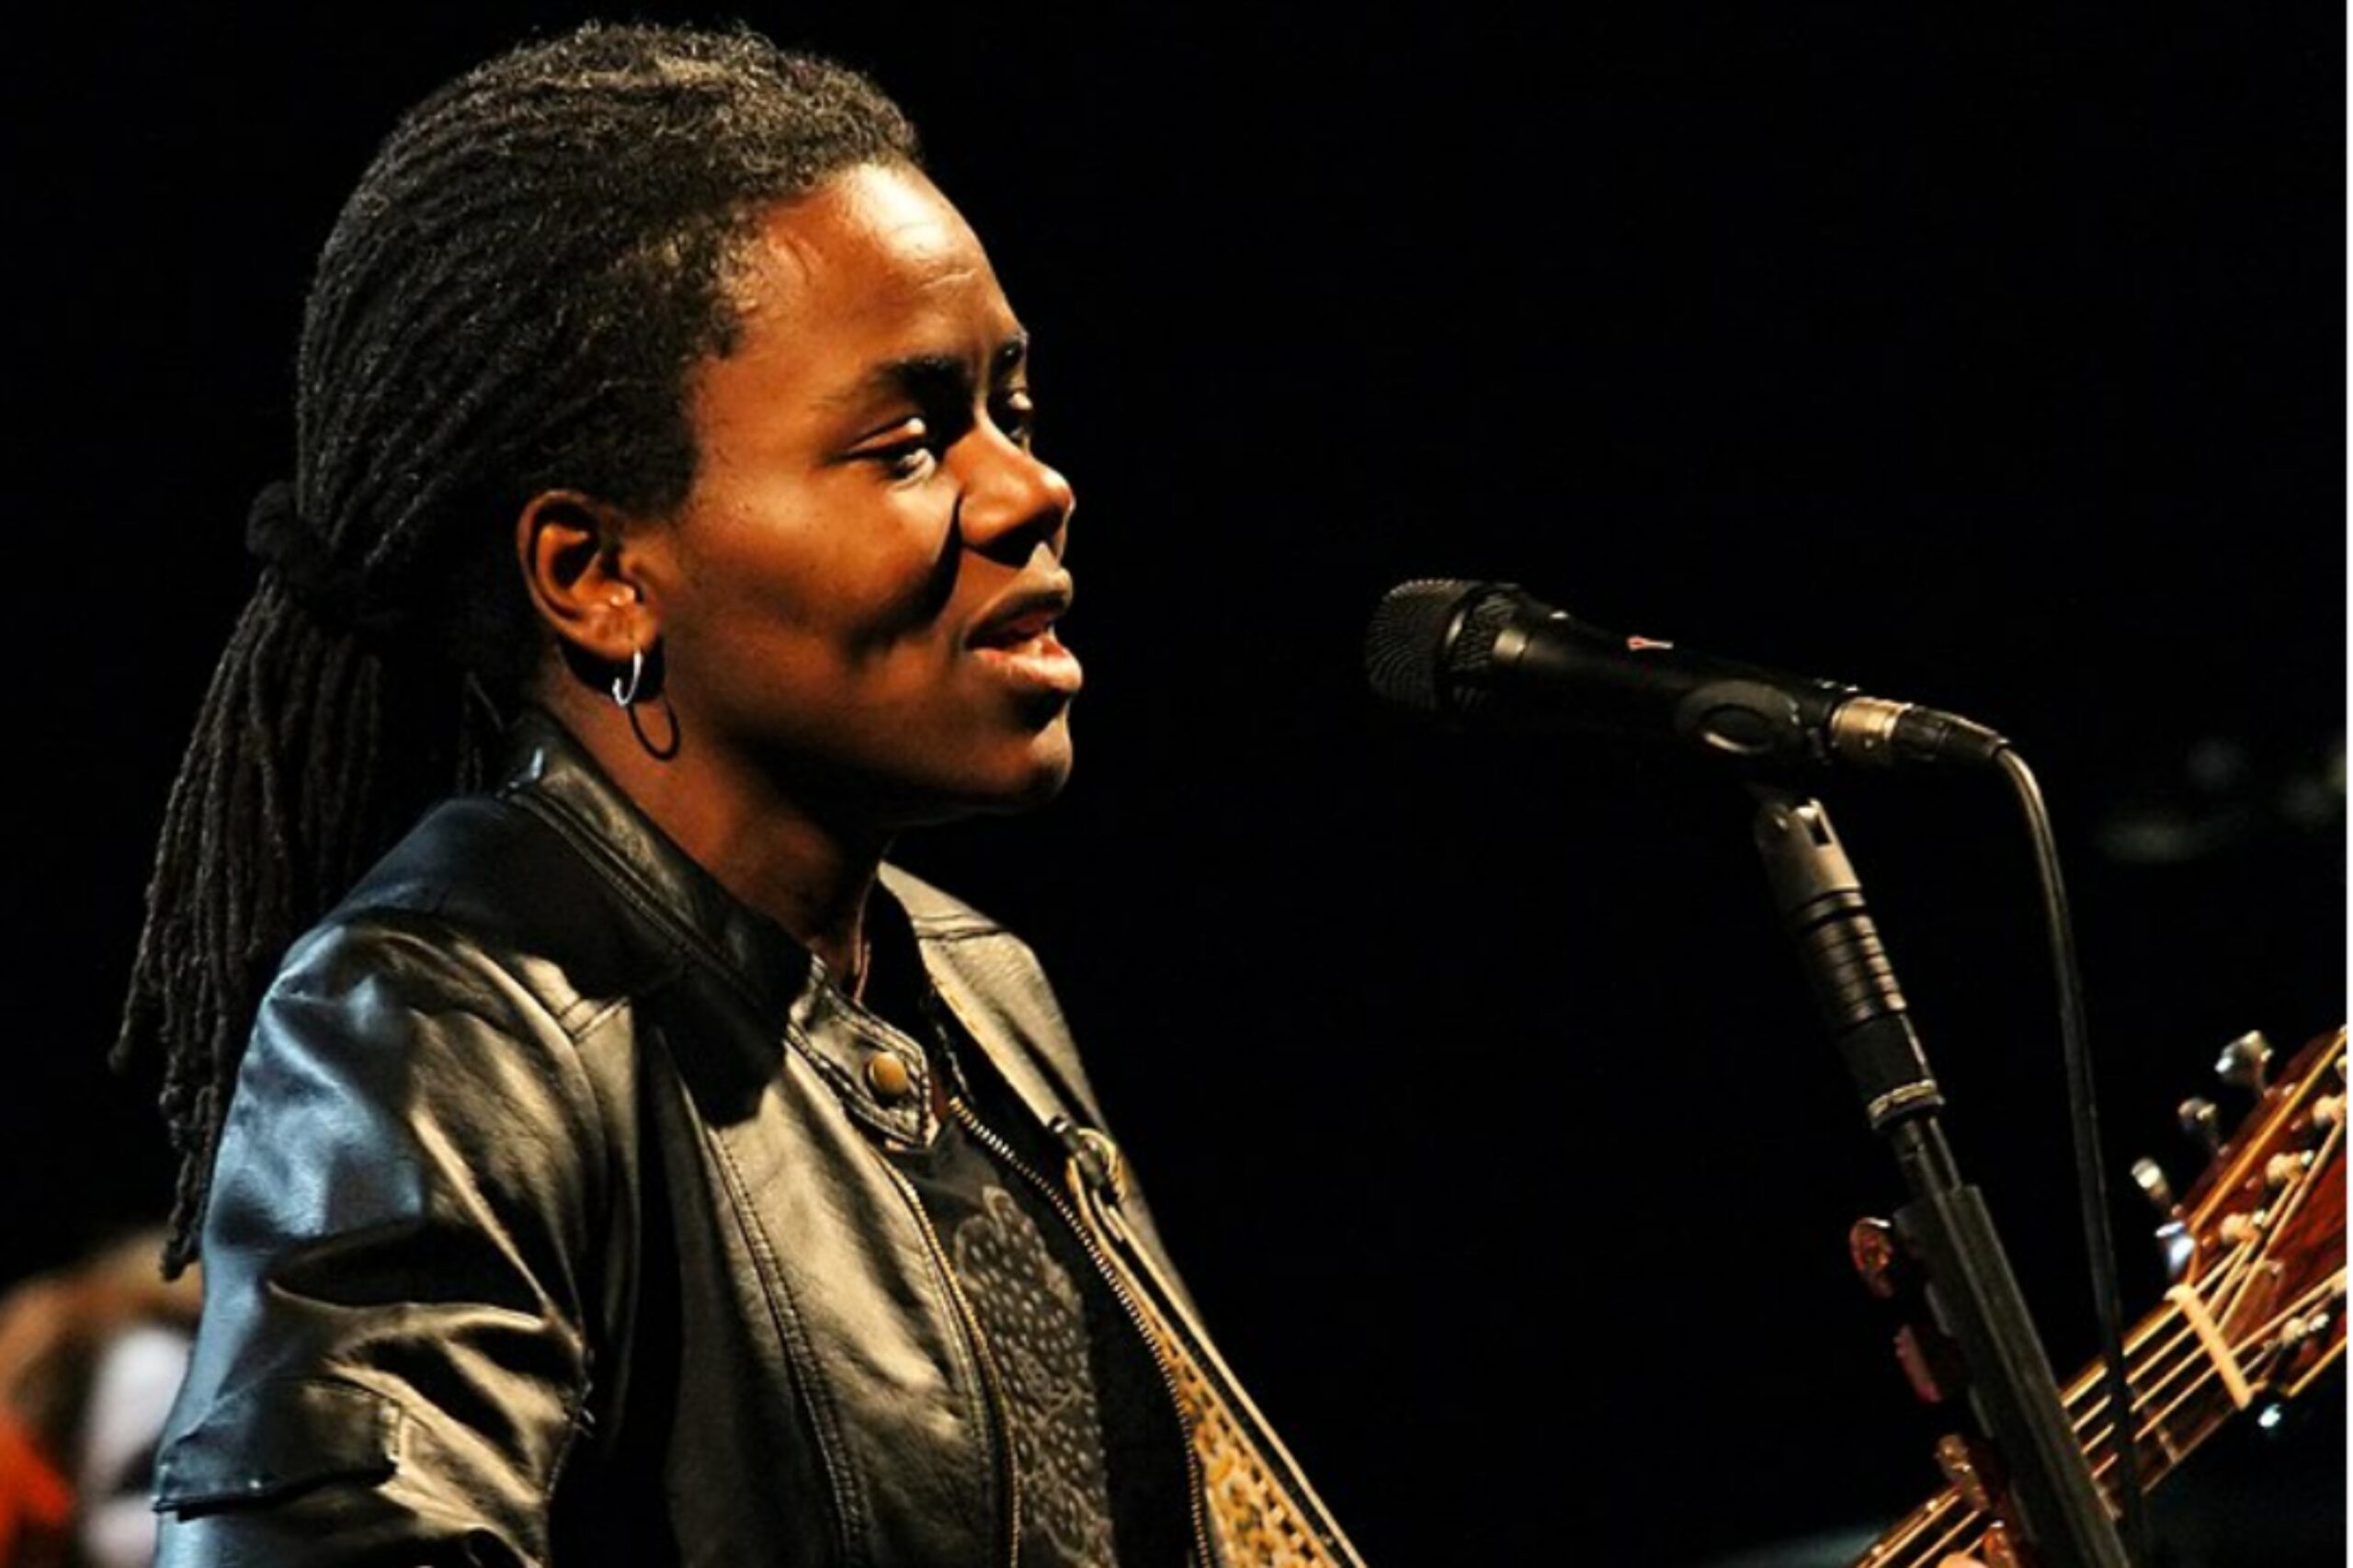 Tracy Chapman at the 2009 Cactus Festival in Bruges, Belgium. (Photo by Hillewaert)